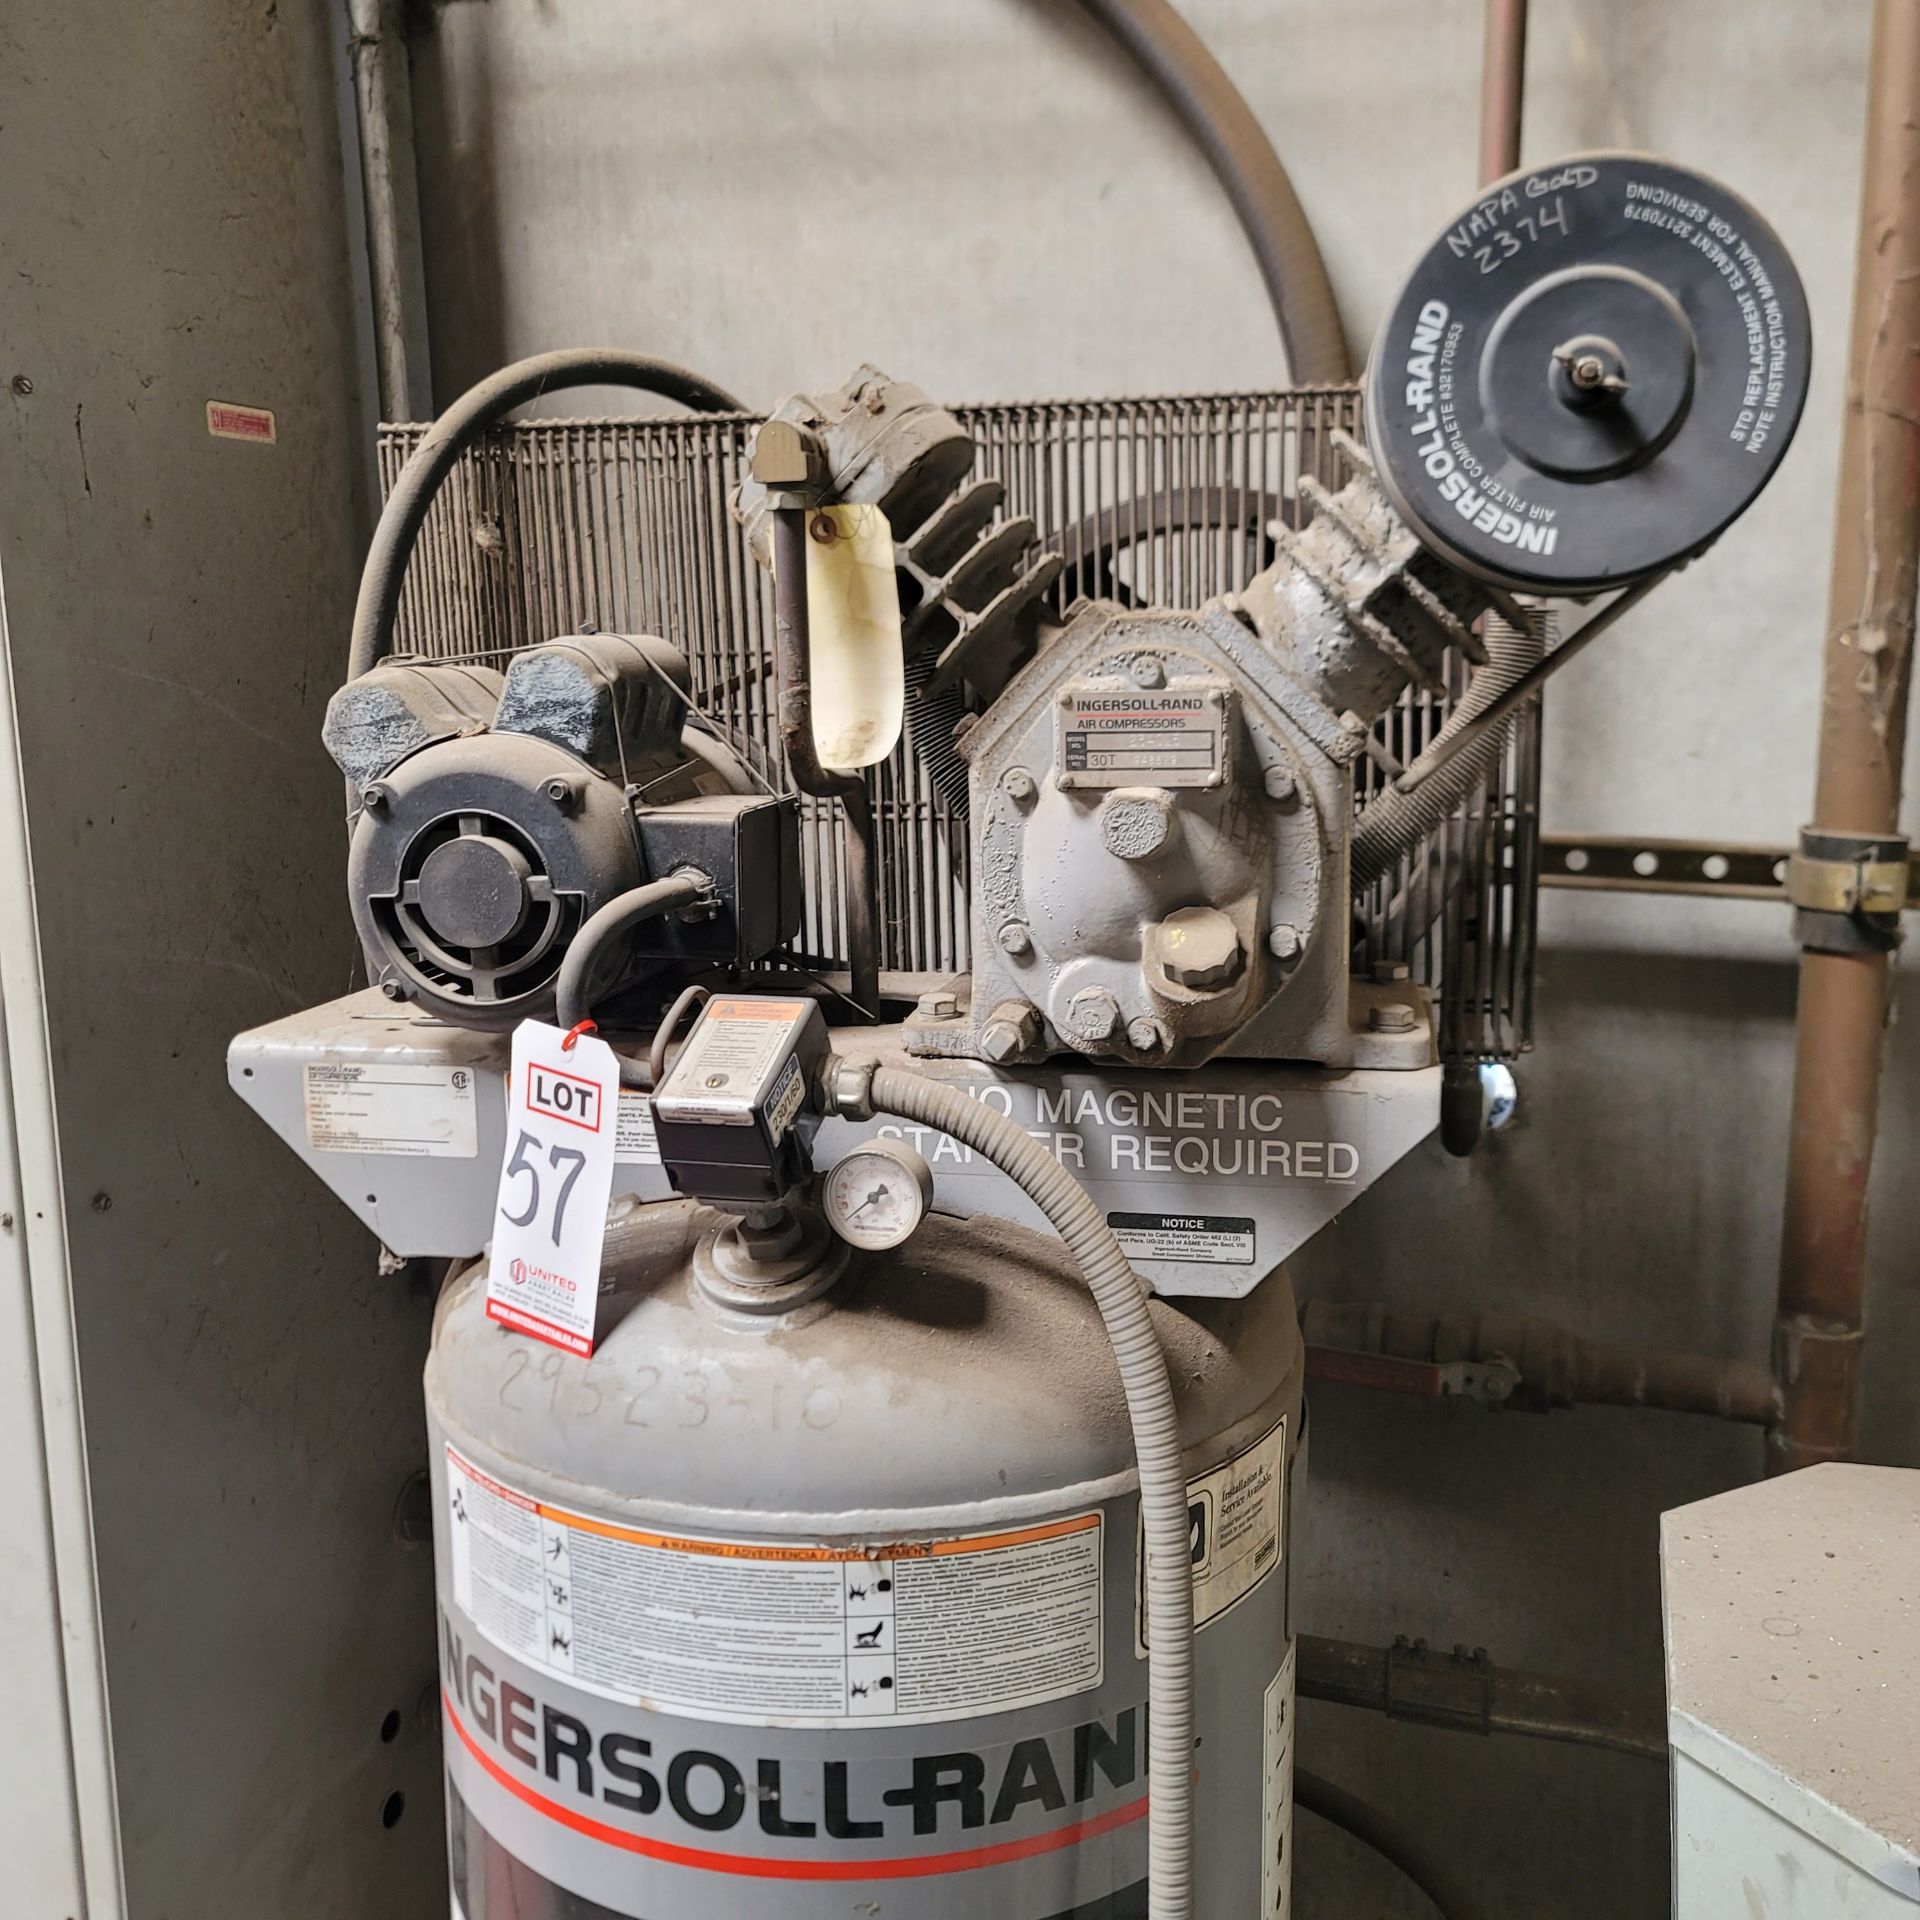 2000 INGERSOLL-RAND TWO-STAGE PISTON AIR COMPRESSOR, MODEL 2340L5, 5 HP, 60 GALLON TANK, S/N 30T - Image 2 of 3